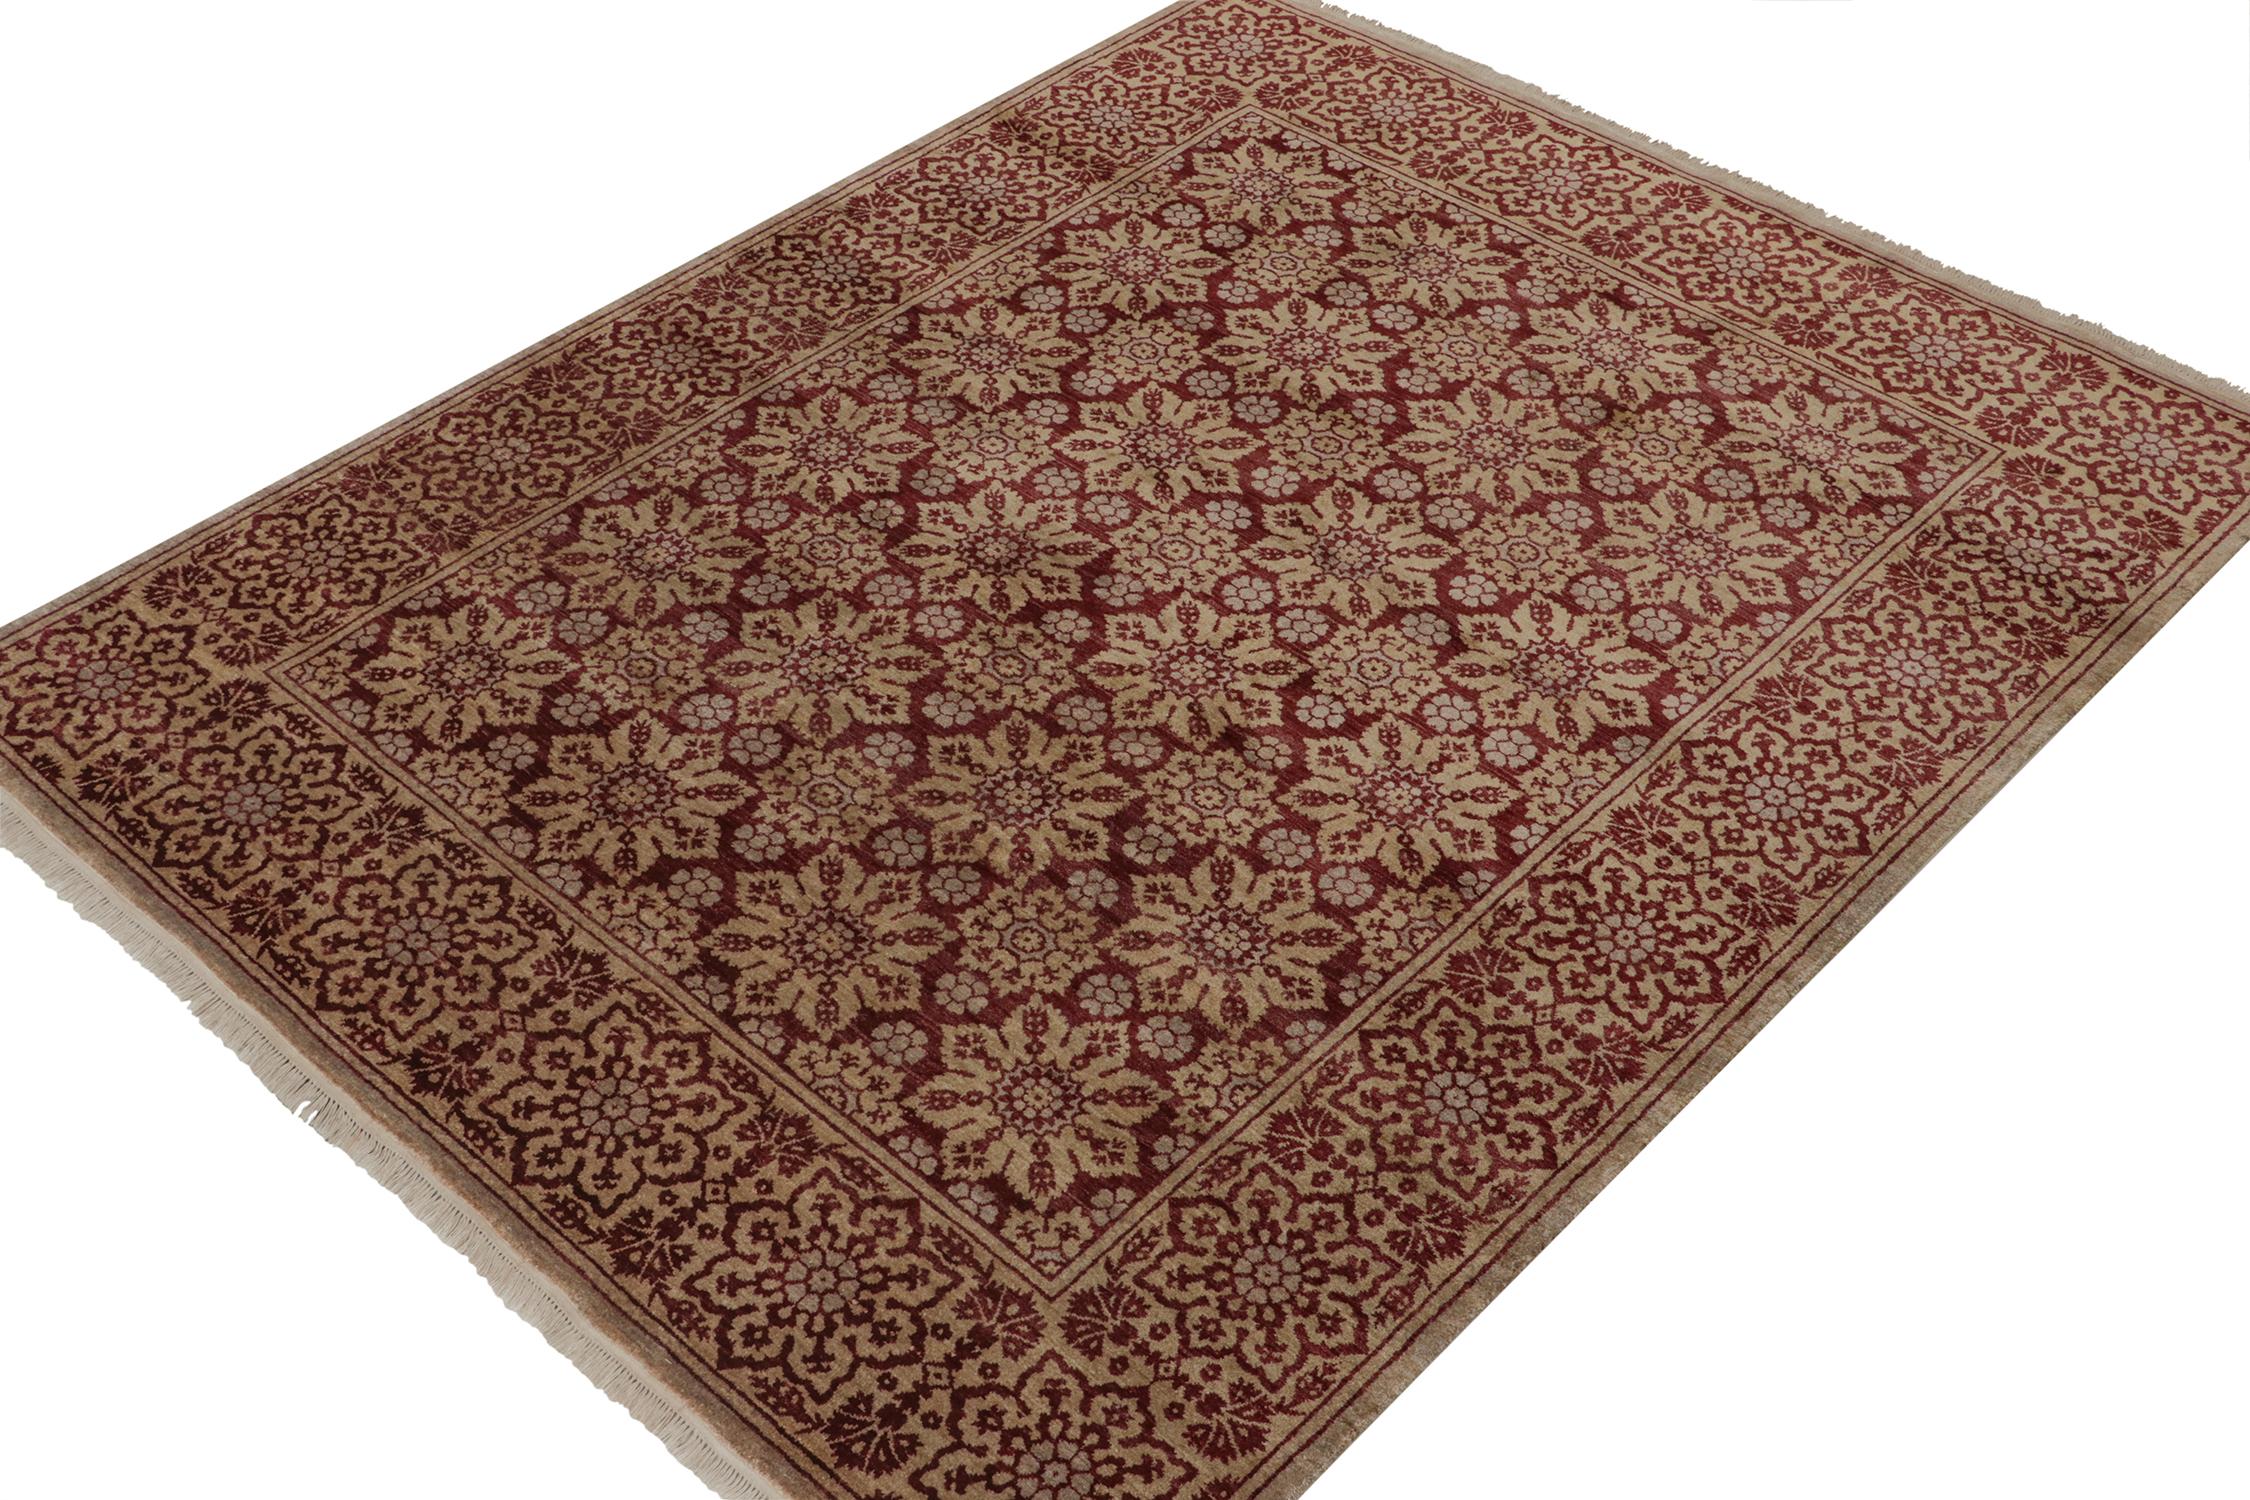 An 8 x 10 rug inspired from antique European rug styles, from Rug & Kilim’s Modern Classics Collection. Hand-knotted in wool, playing an exceptional maroon and gold in floral patterns with classic grace.
Further On the Design:
The play of rich